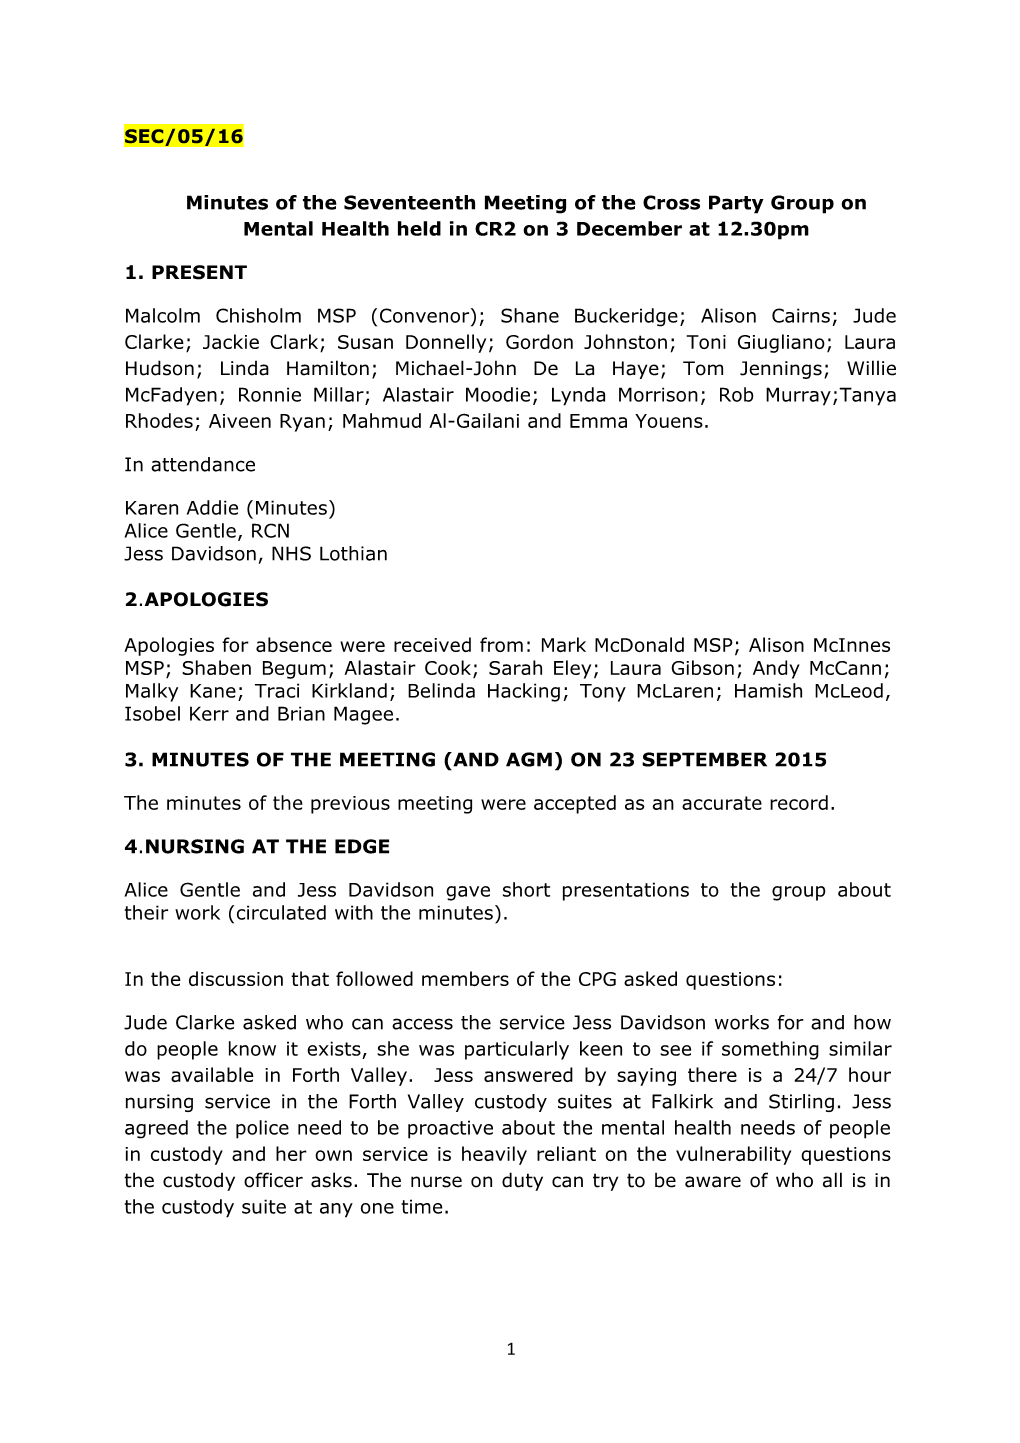 Minutes of the Seventeenth Meeting of the Cross Party Group on Mental Health Held in CR2